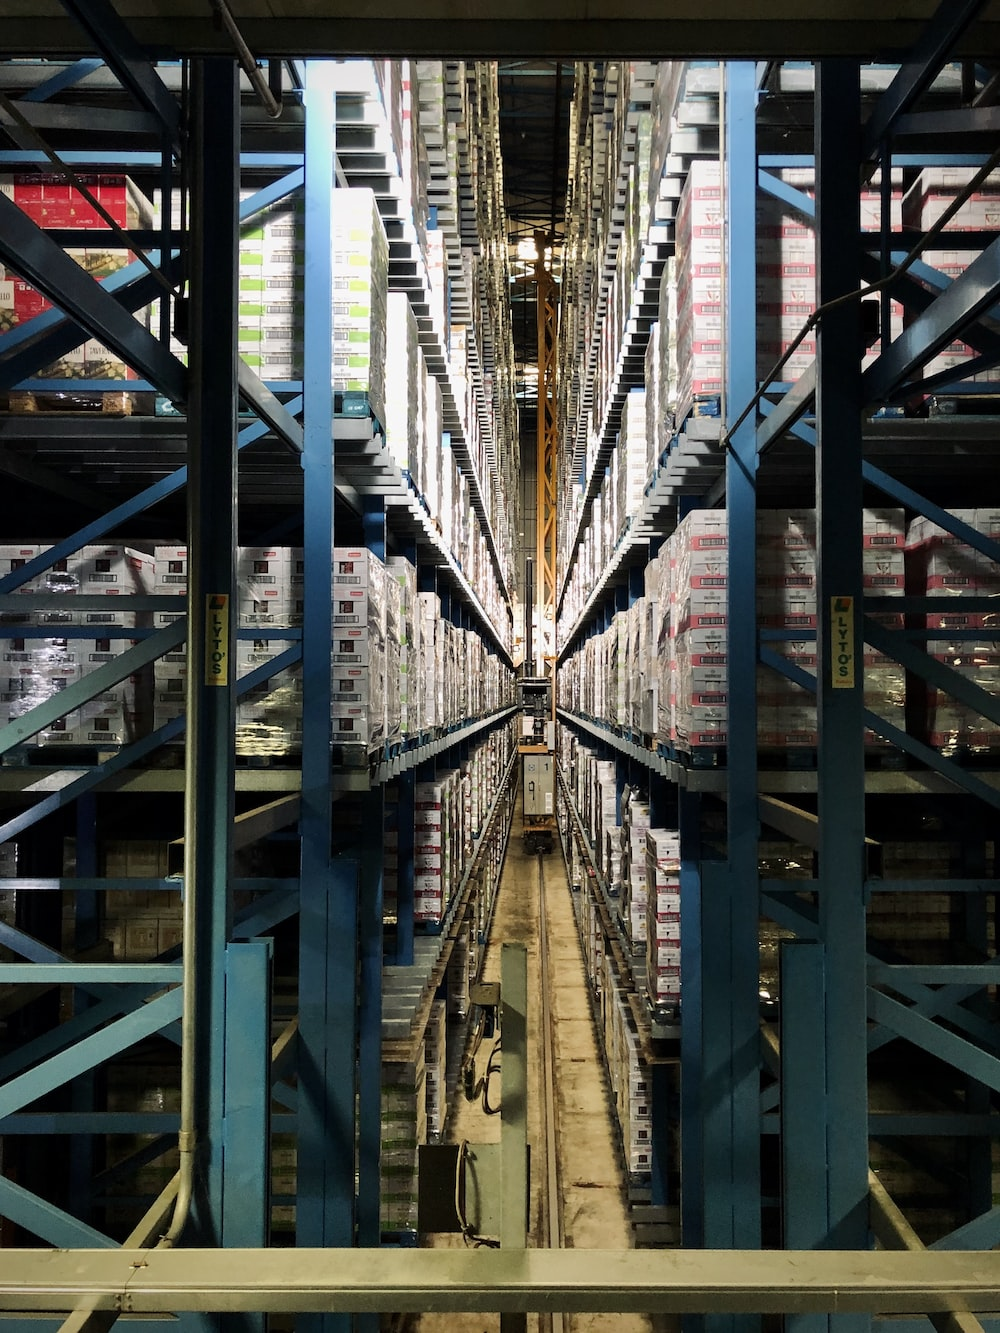 Automated Warehouse Logistics: Plan for Supportive Material Handling Equipment